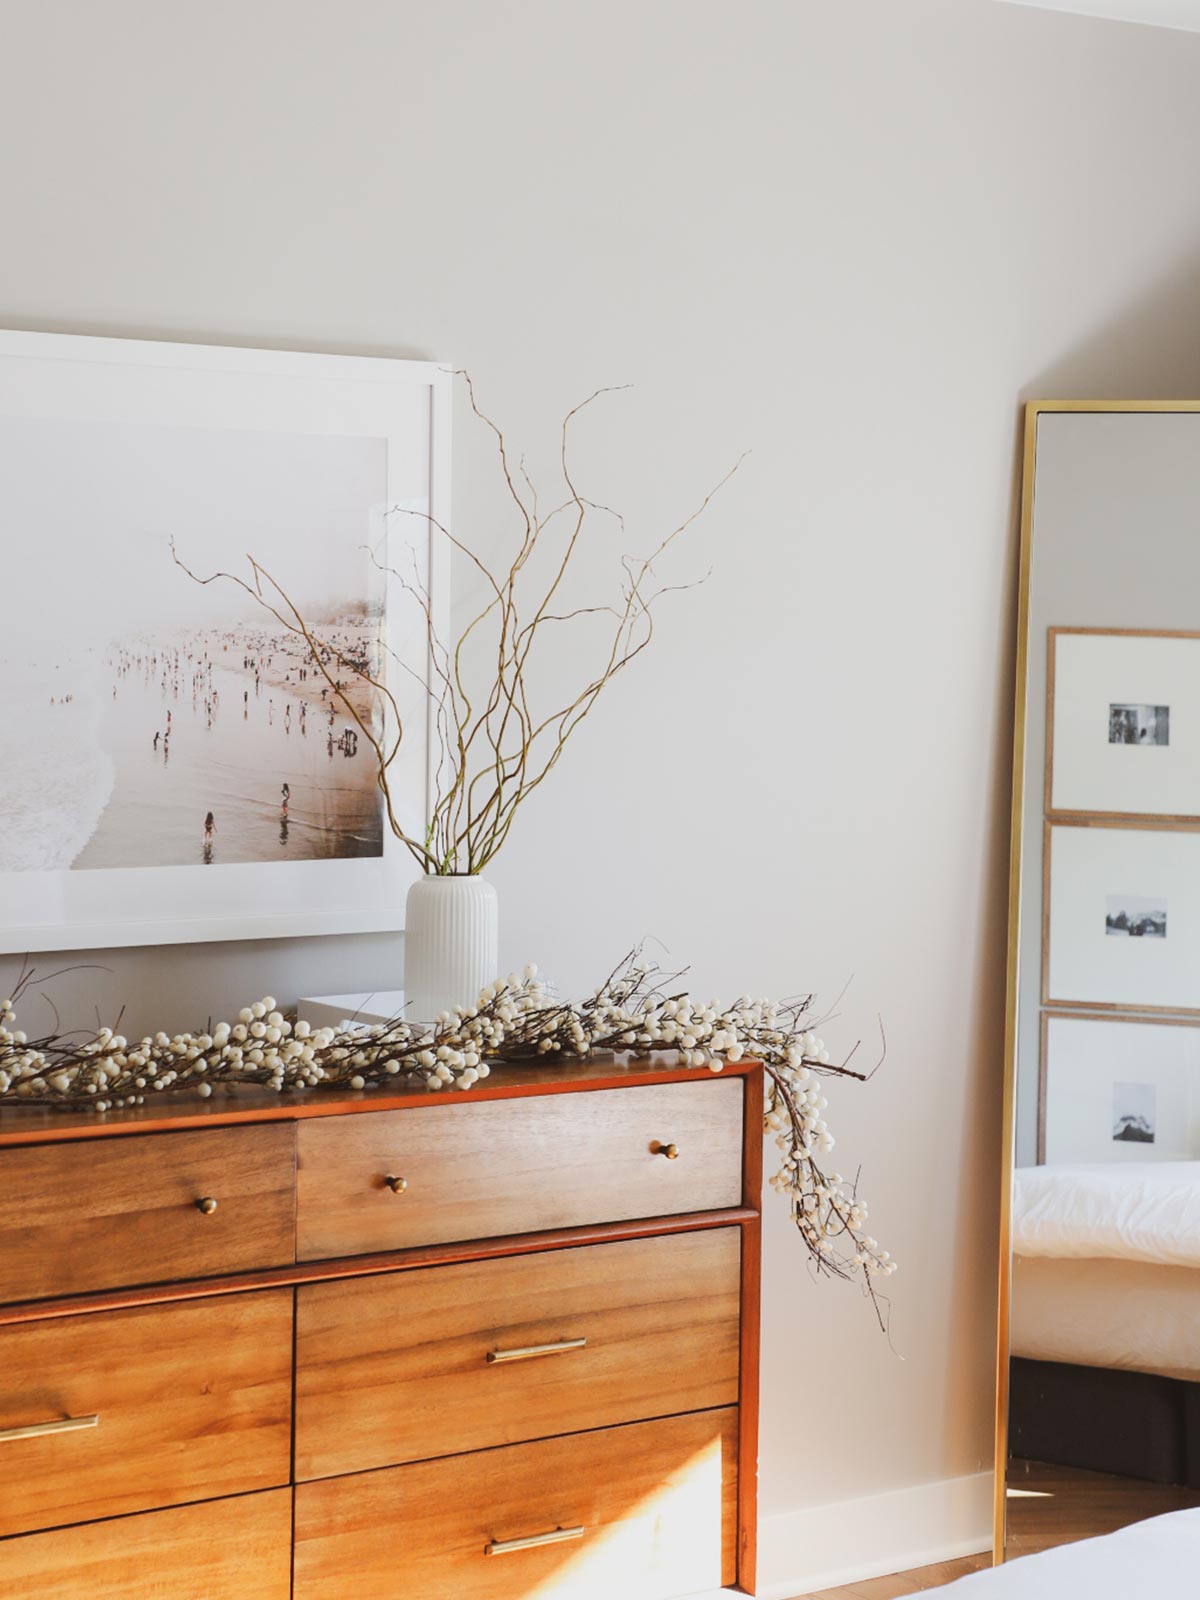 Gallery Frame featuring photo of the beach on bedroom wall above dresser with dried branches in vase.